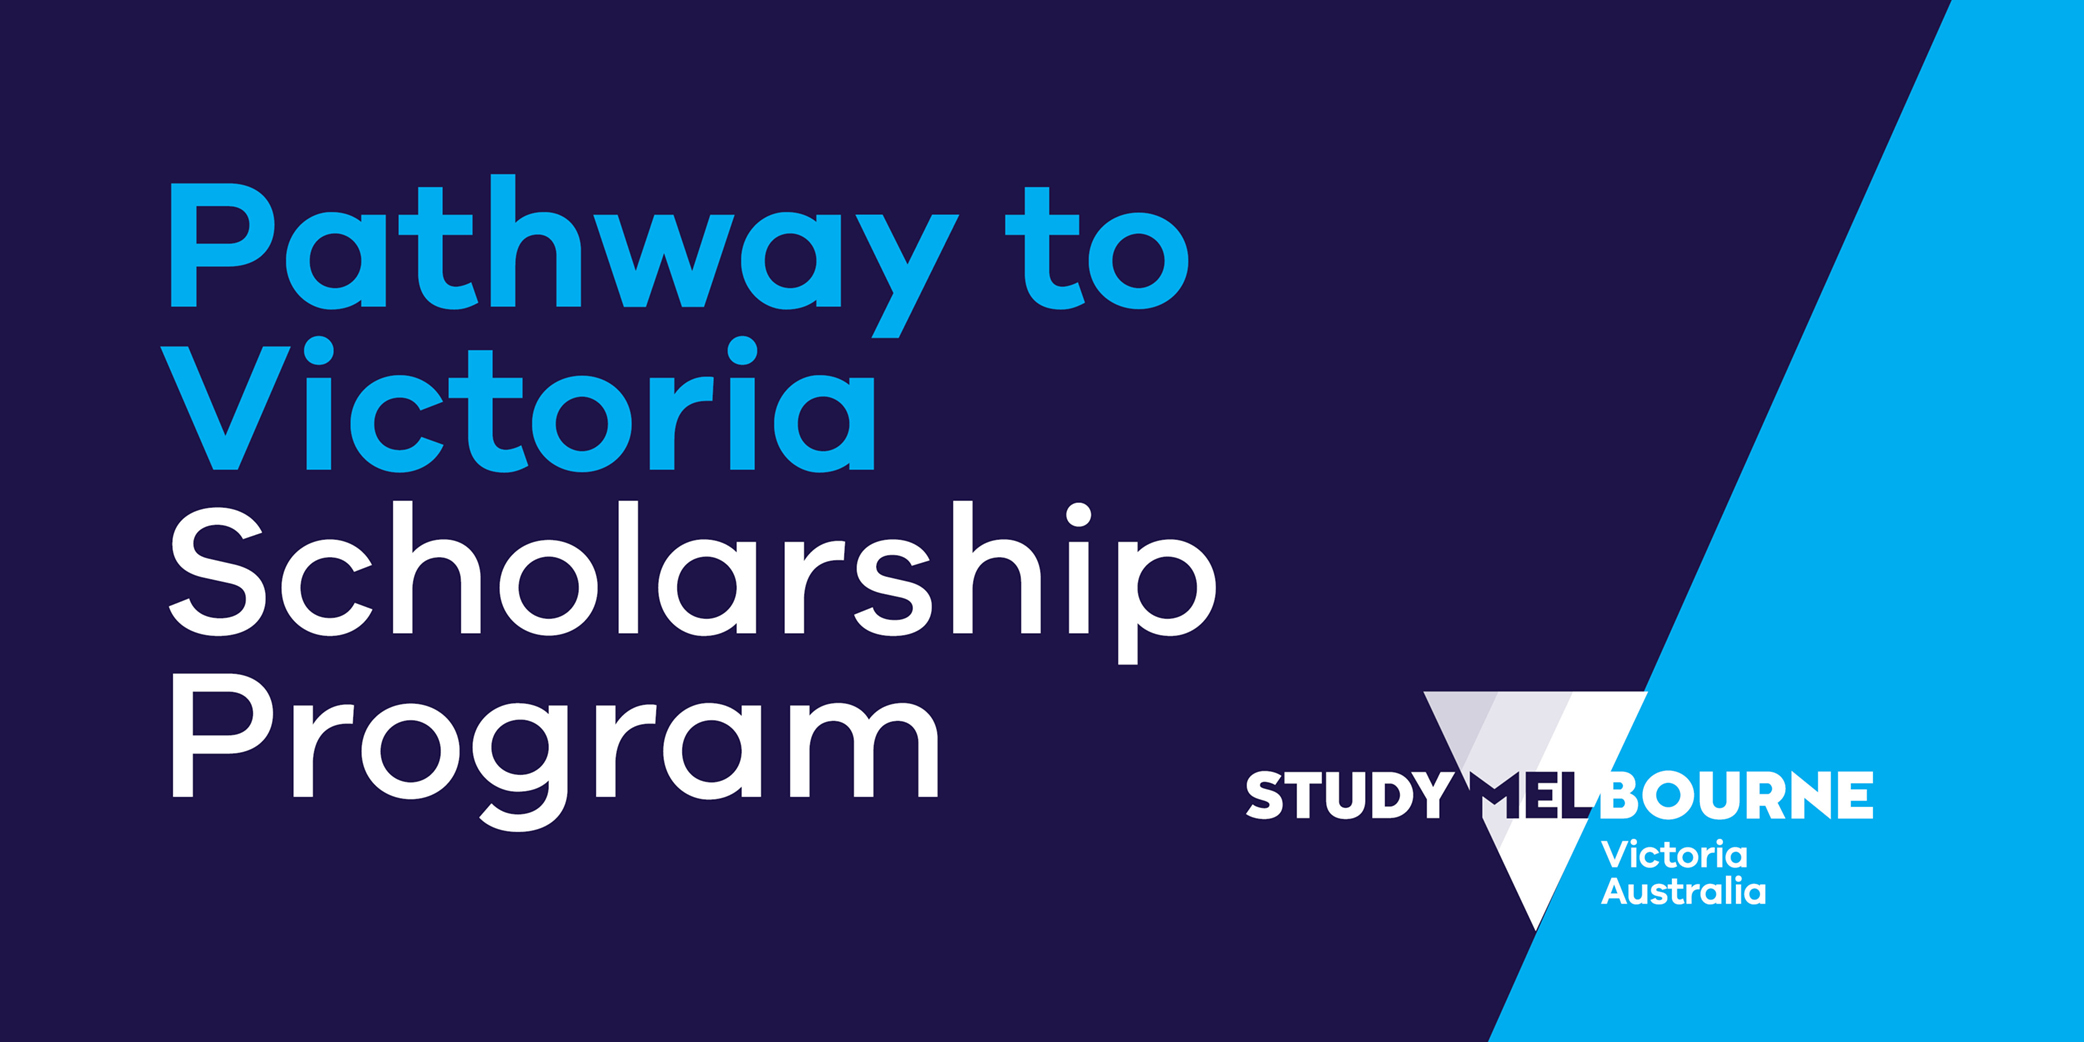 Text that reads 'Pathway to Victoria scholarship Program’. Study Melbourne logo in corner.